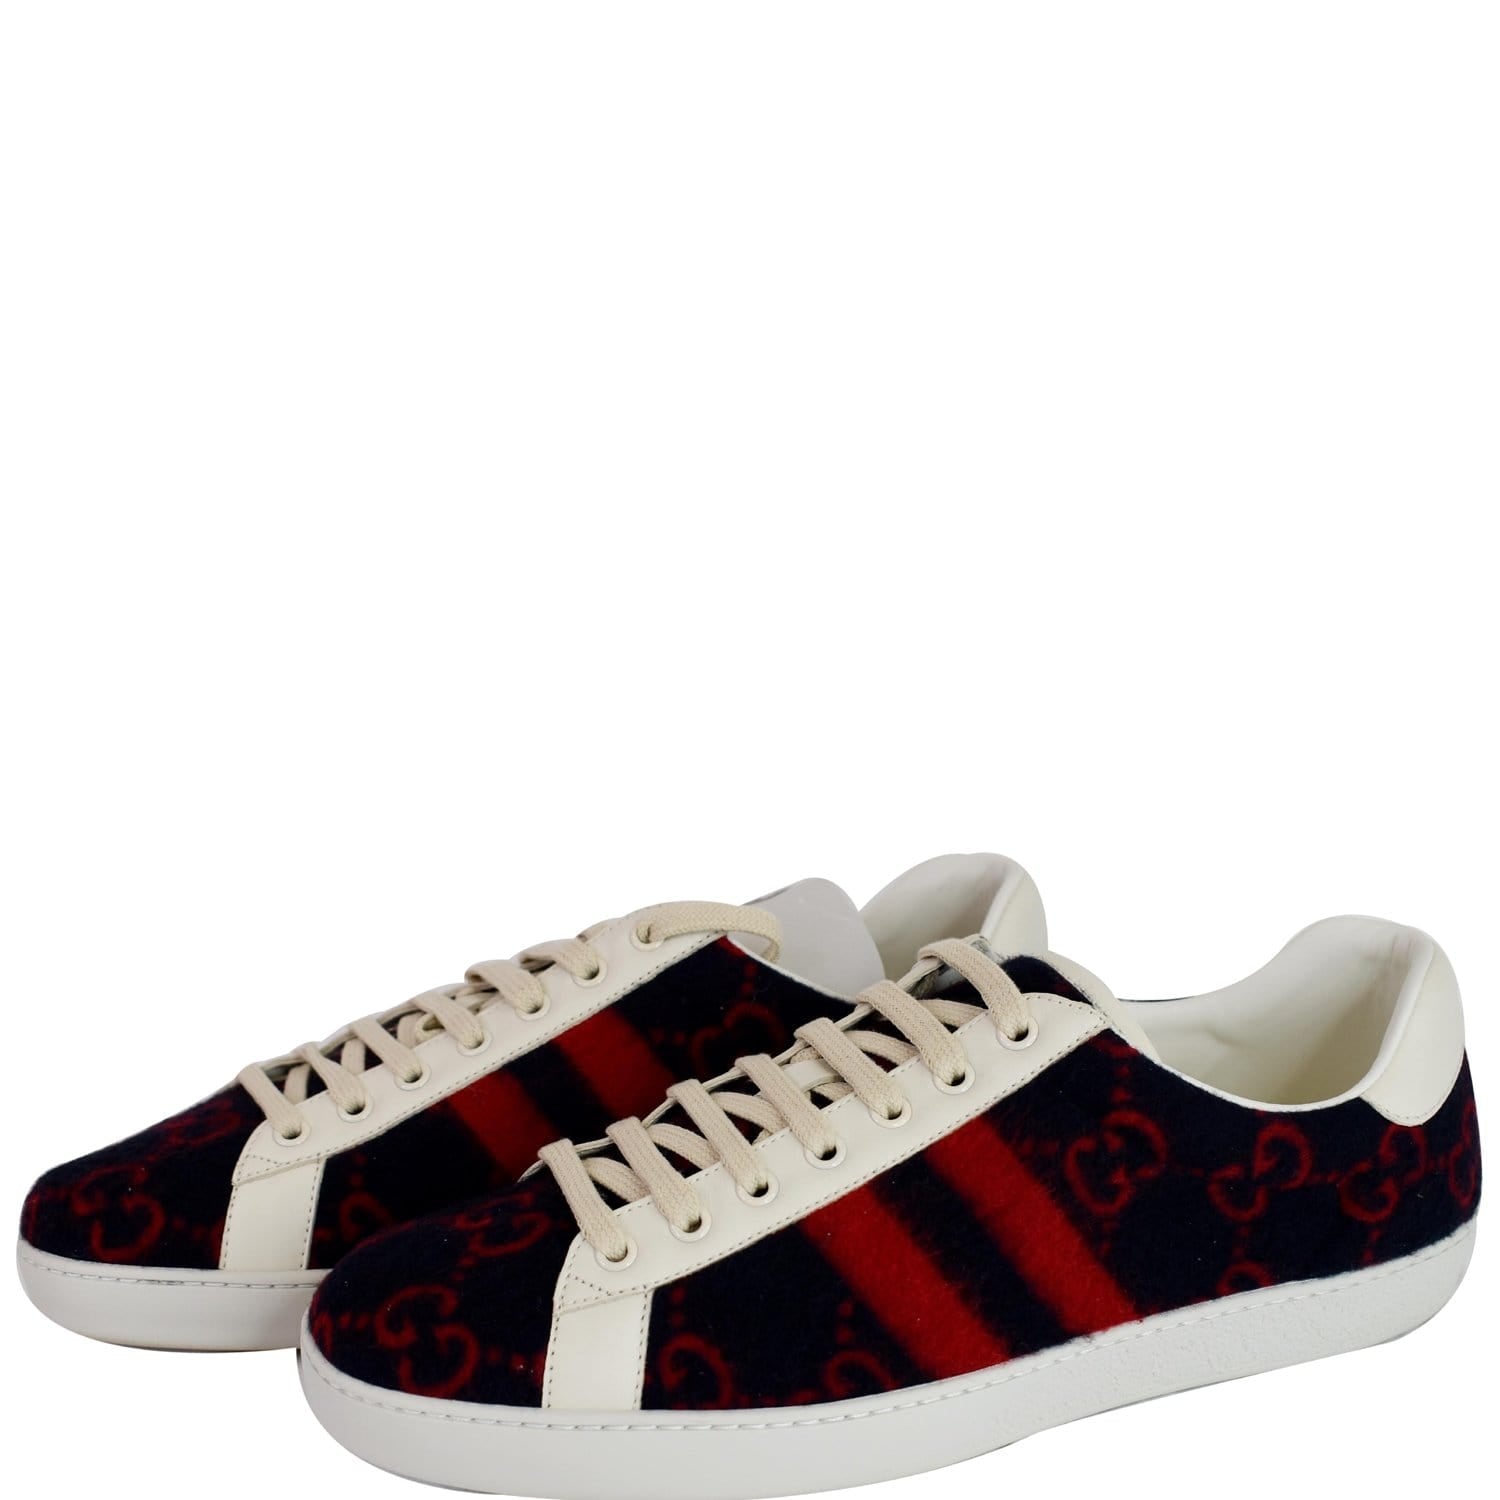 Men's Ace Sneaker Black GG Supreme Canvas With Blue & Red Web